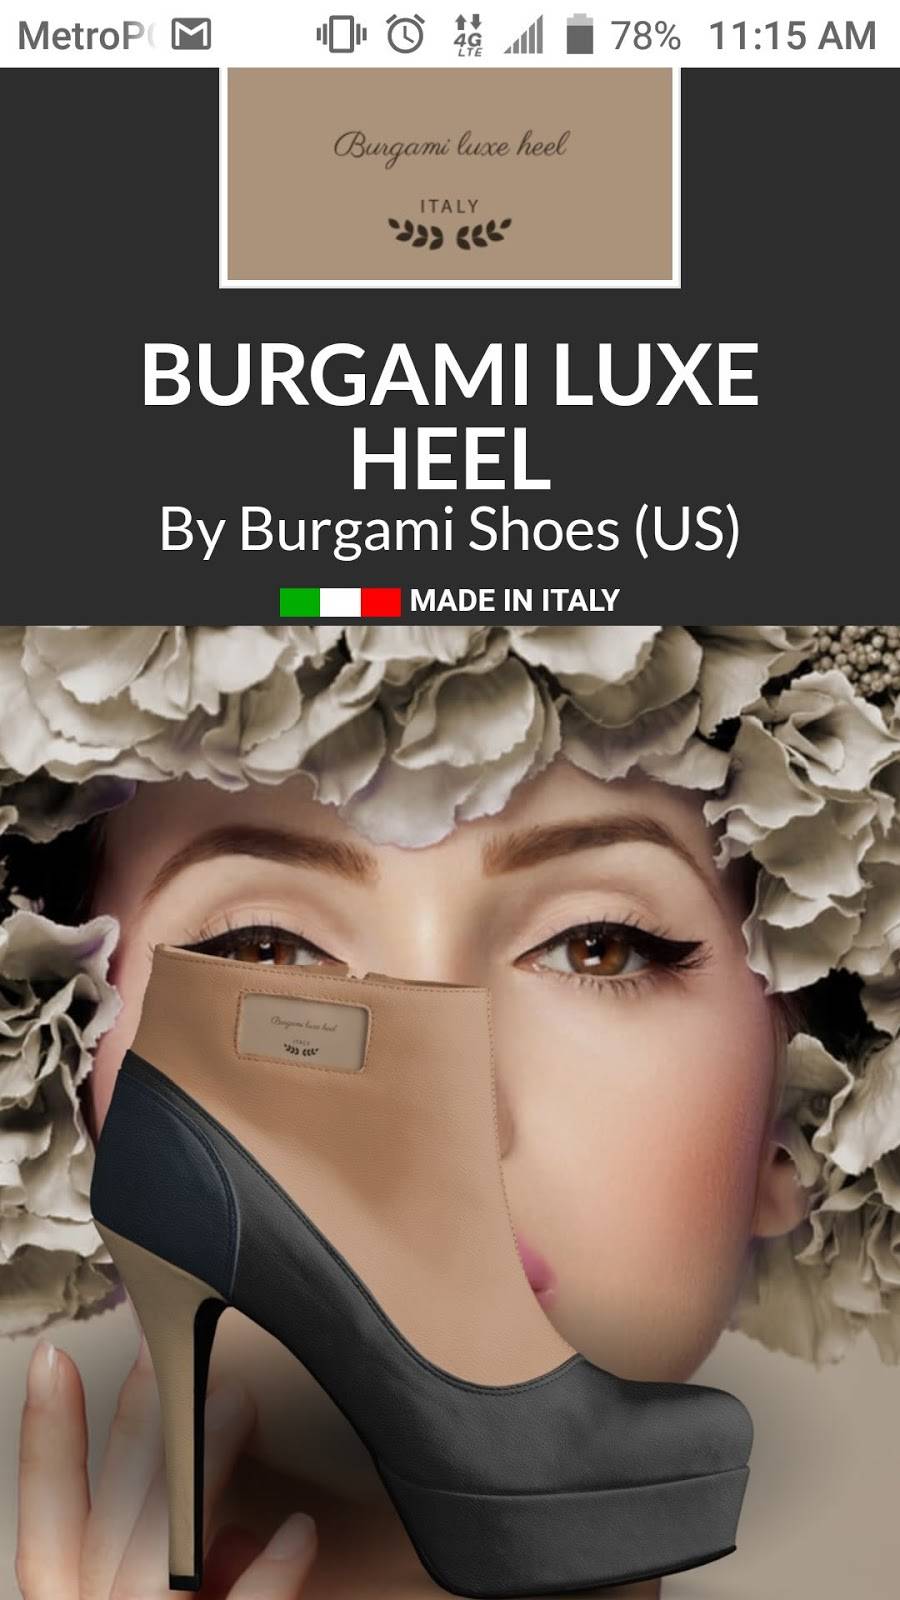 Burgami Sneakers | 1405 S Madison Ave, Clearwater, FL 33756, USA | Phone: (727) 259-3934